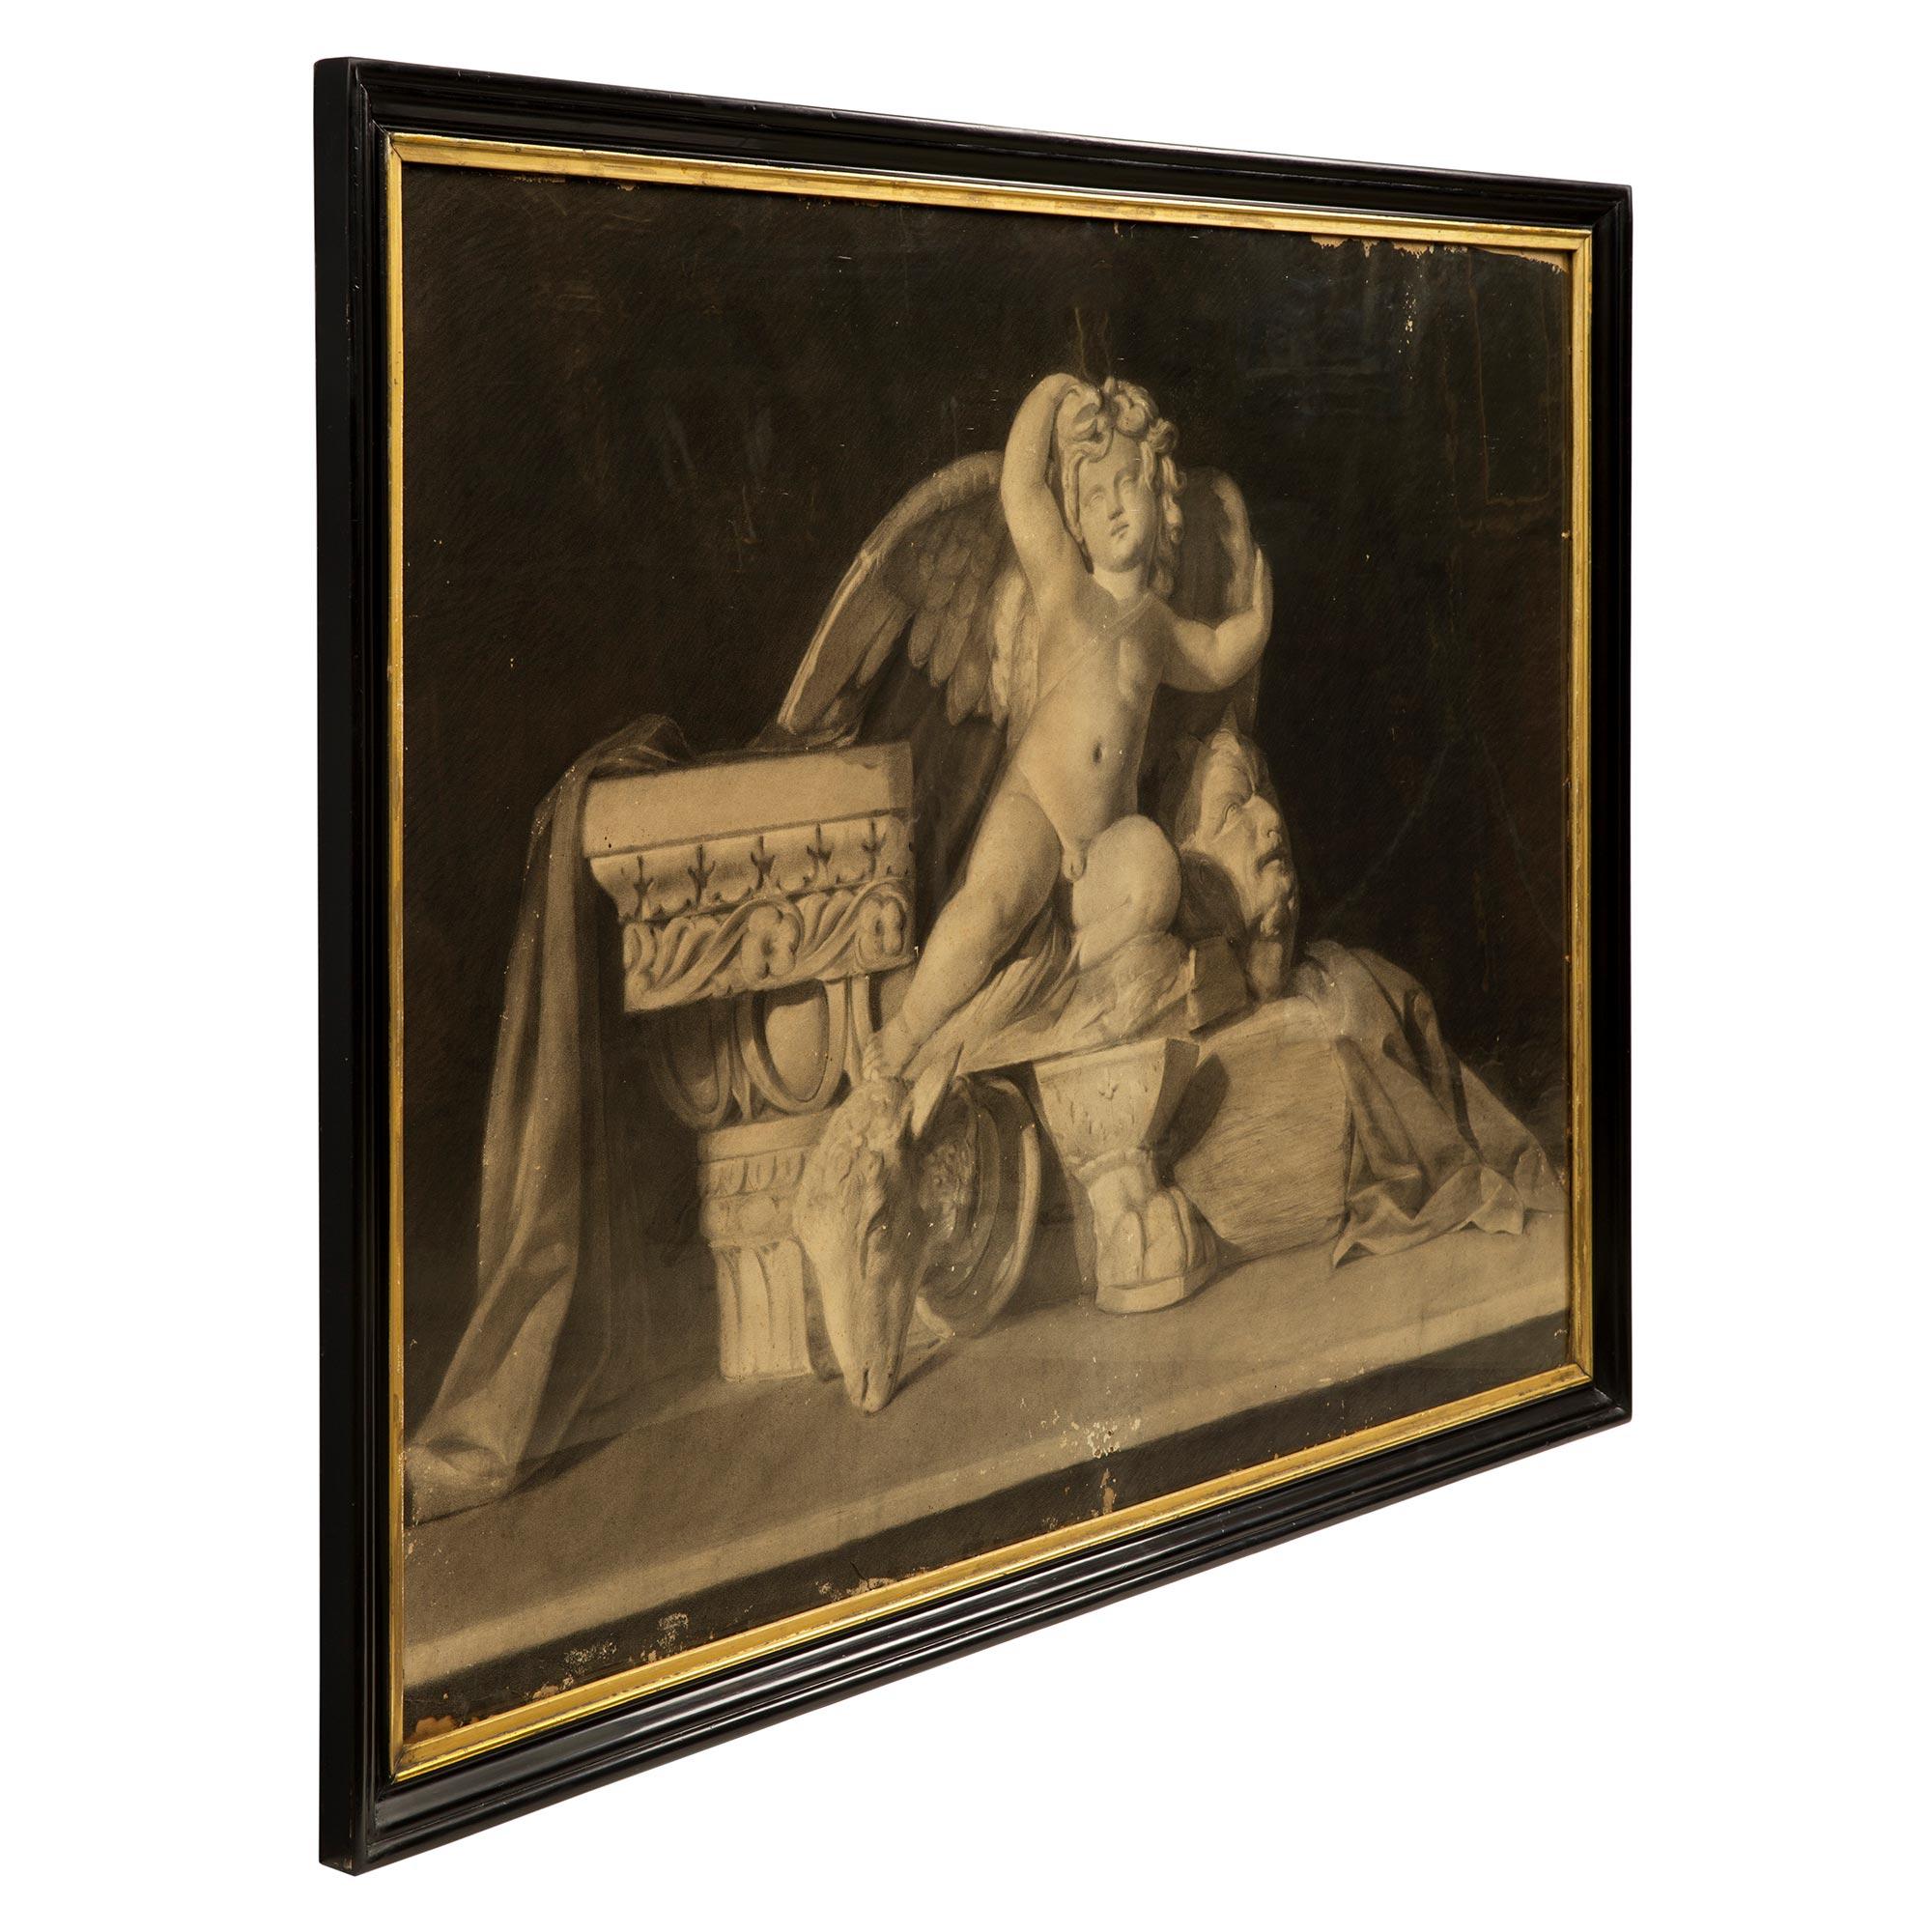 A very fine and most charming Italian 19th century charcoal grisaille of a winged cherub. The beautiful art work is within its original ebonized fruit wood and giltwood frame with a decorative mottled design. At the center is the wonderfully